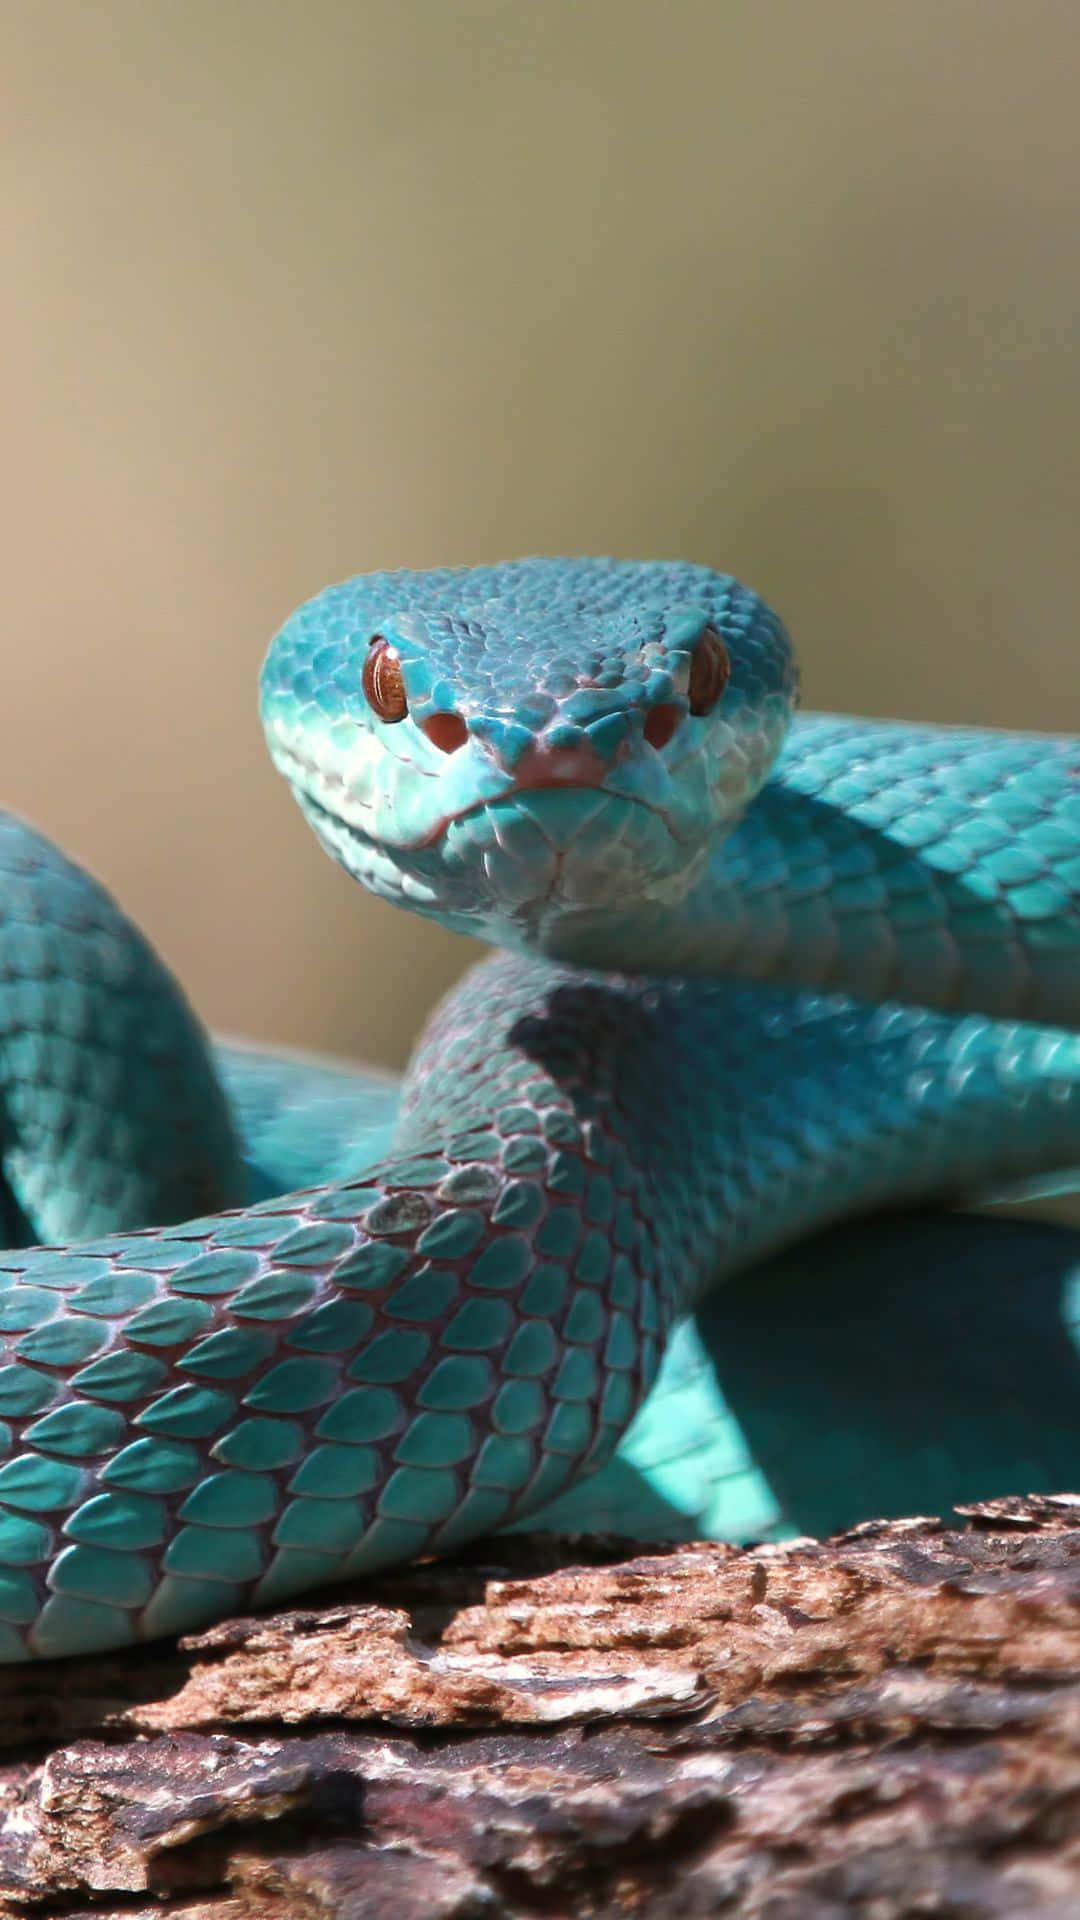 Cool Snake With Teal Skin